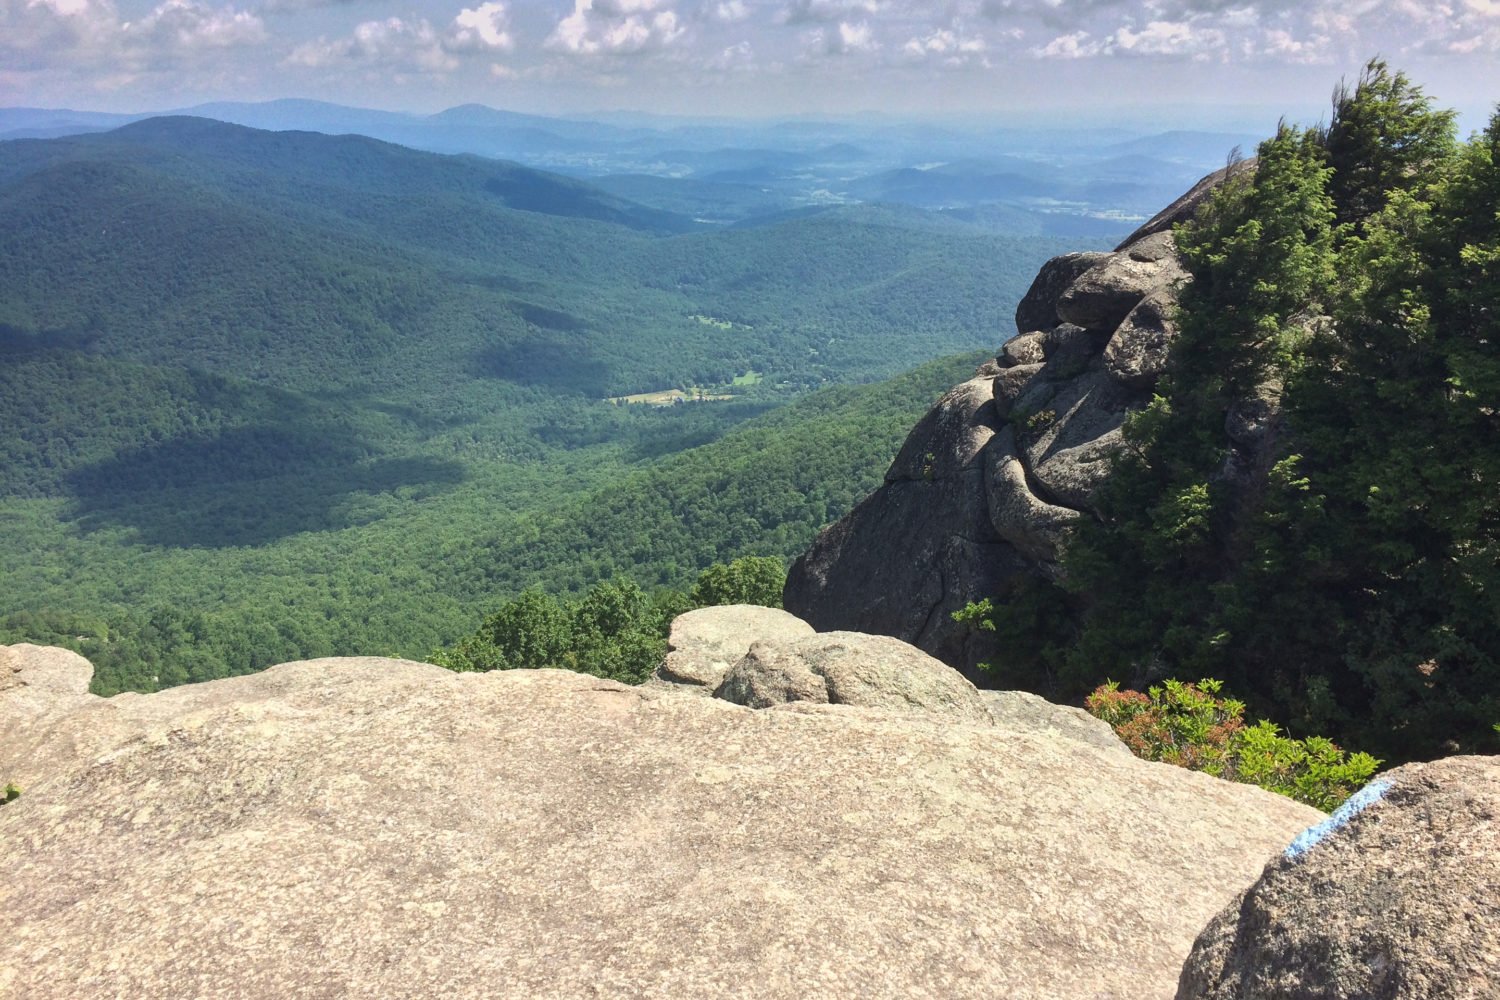 The view from Old Rag Mountain. Photo by Flickr user Larry Borreson.